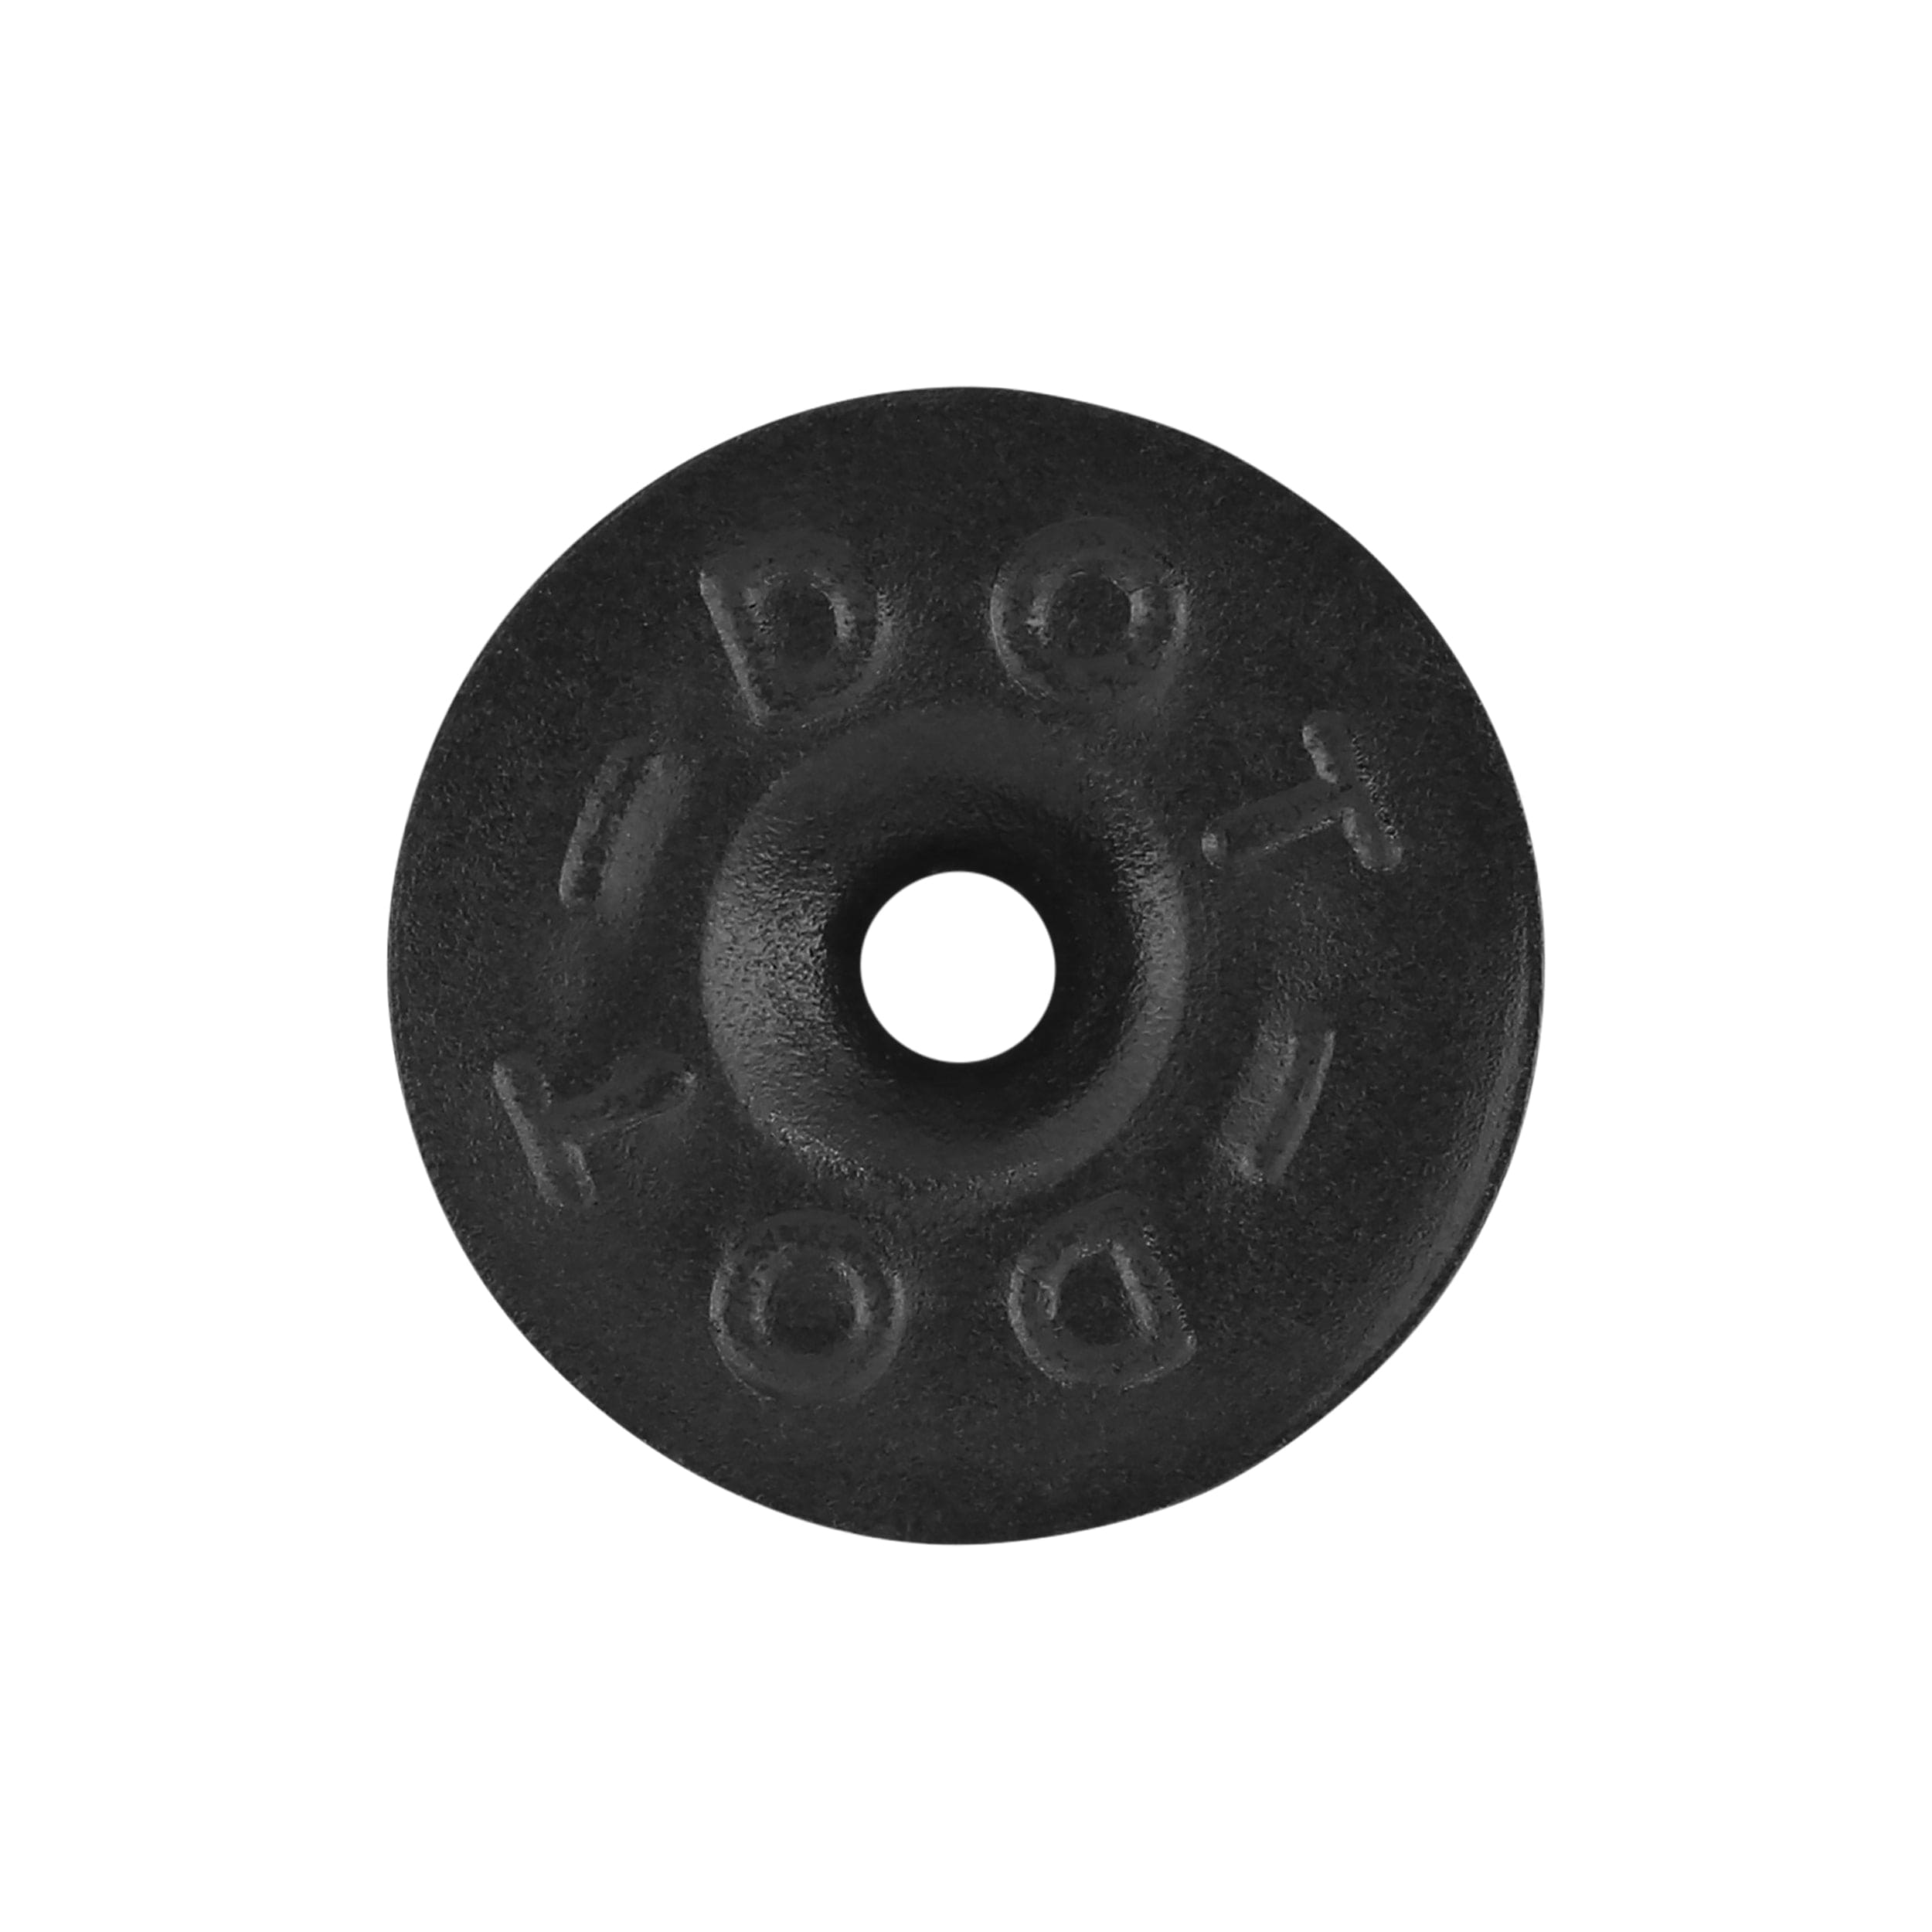 Ohio Travel Bag Fasteners Ligne 20 Black Oxide, Dot Baby Durable Post, Solid Brass, #12404-BLK-OX 12404-BLK-OX